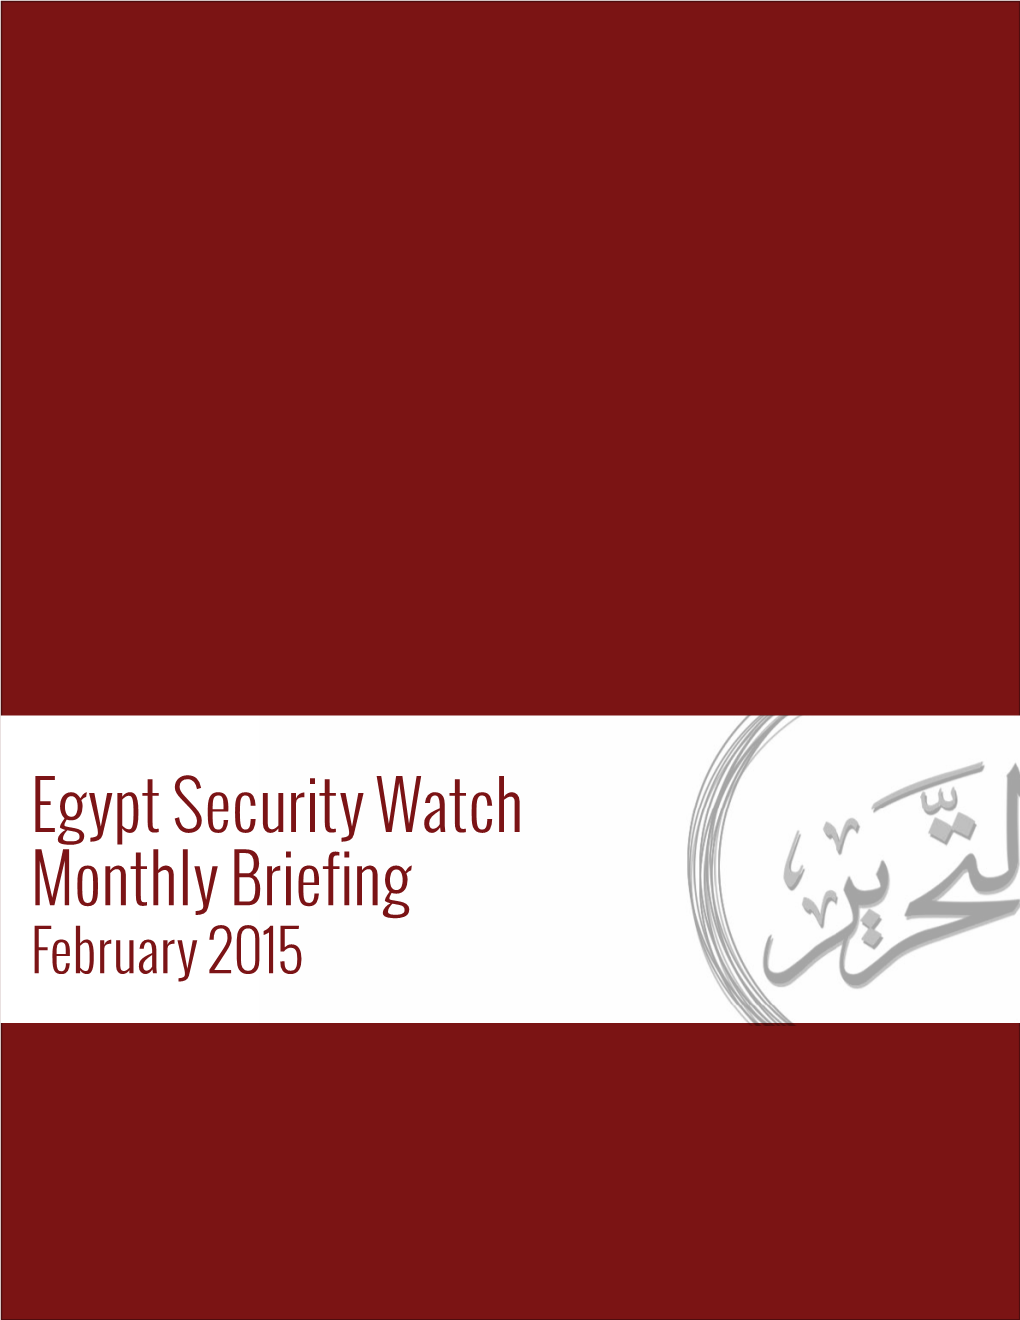 Egypt Security Watch Monthly Briefing February 2015 Summary